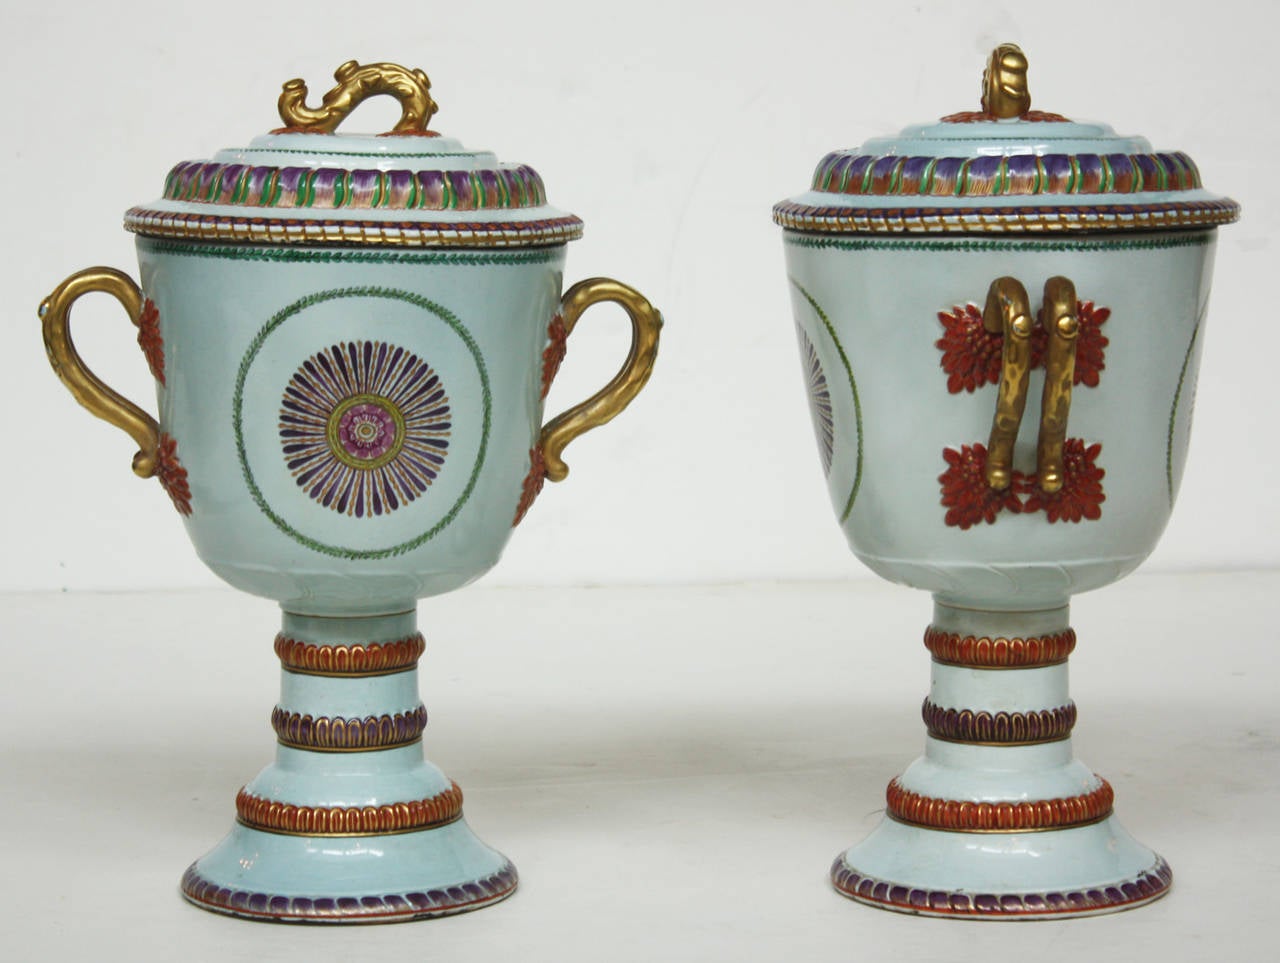 A pair of Chinese export porcelain jars with lids, urn-form, white with orange, purple and green design with gilt handles, diameter of base is 6